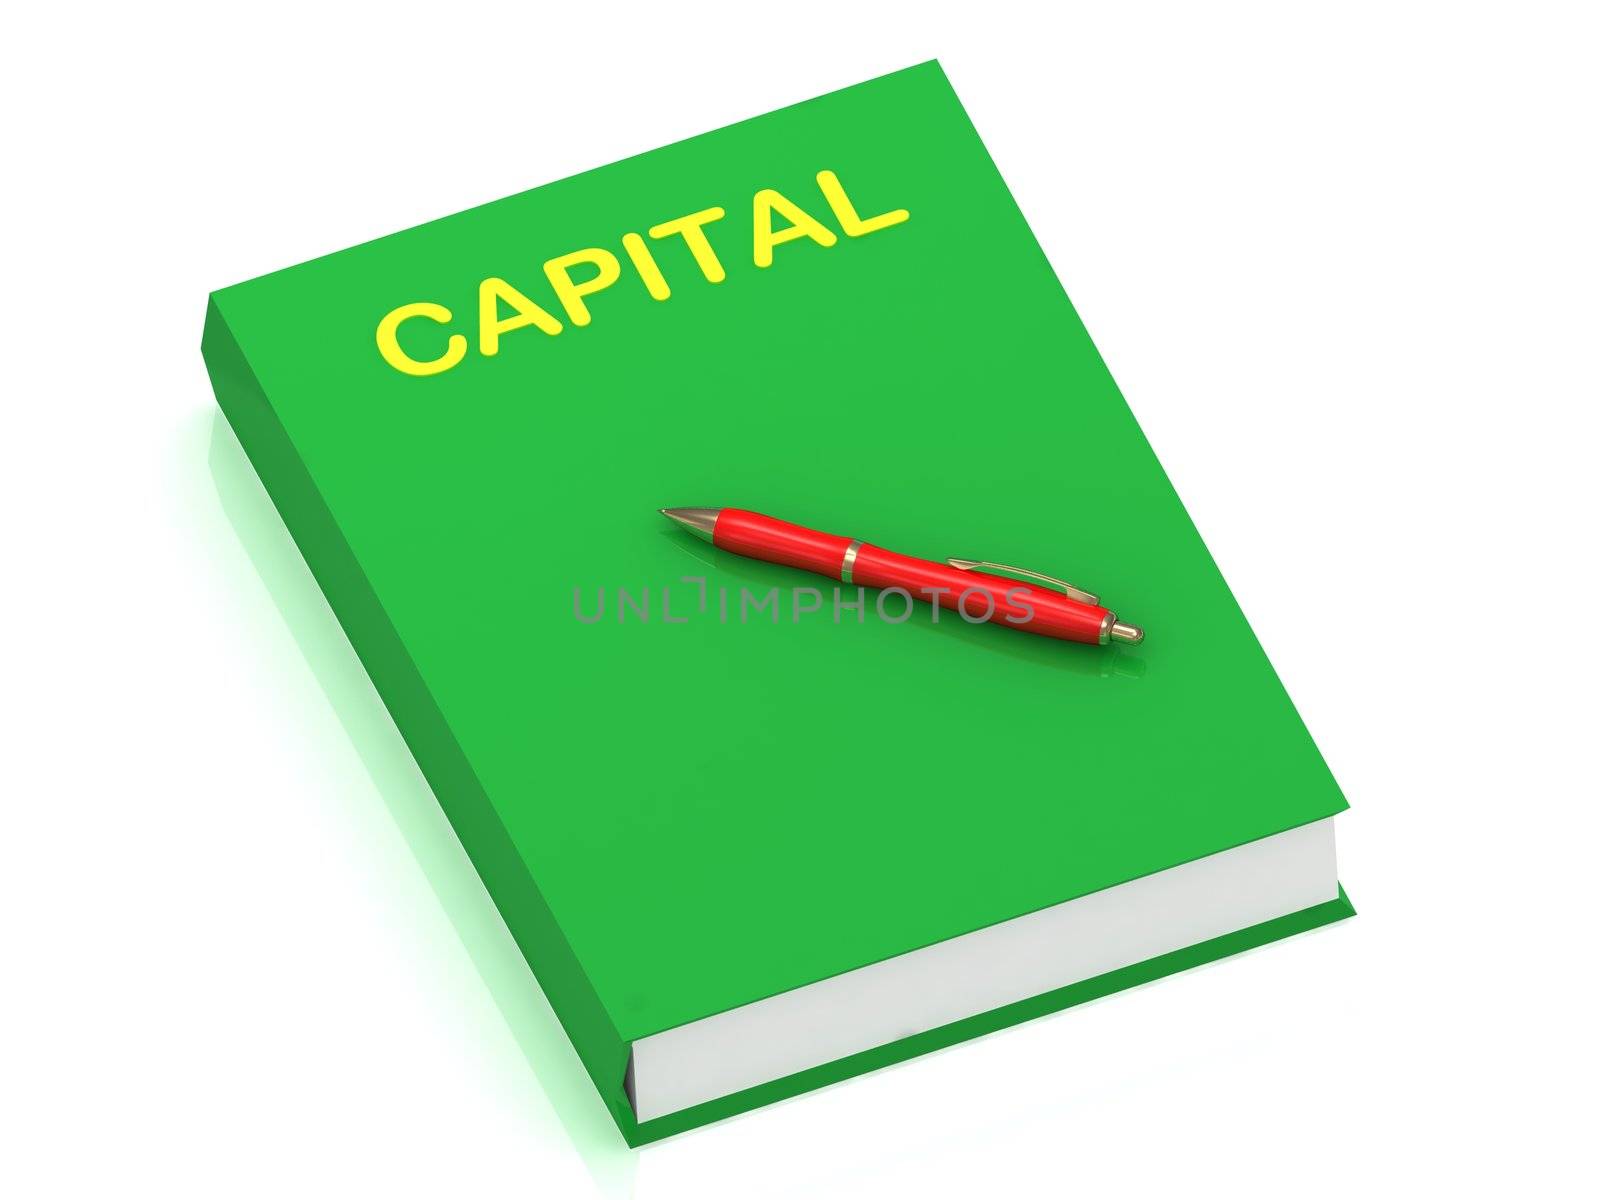 CAPITAL name on cover book and red pen on the book. 3D illustration isolated on white background